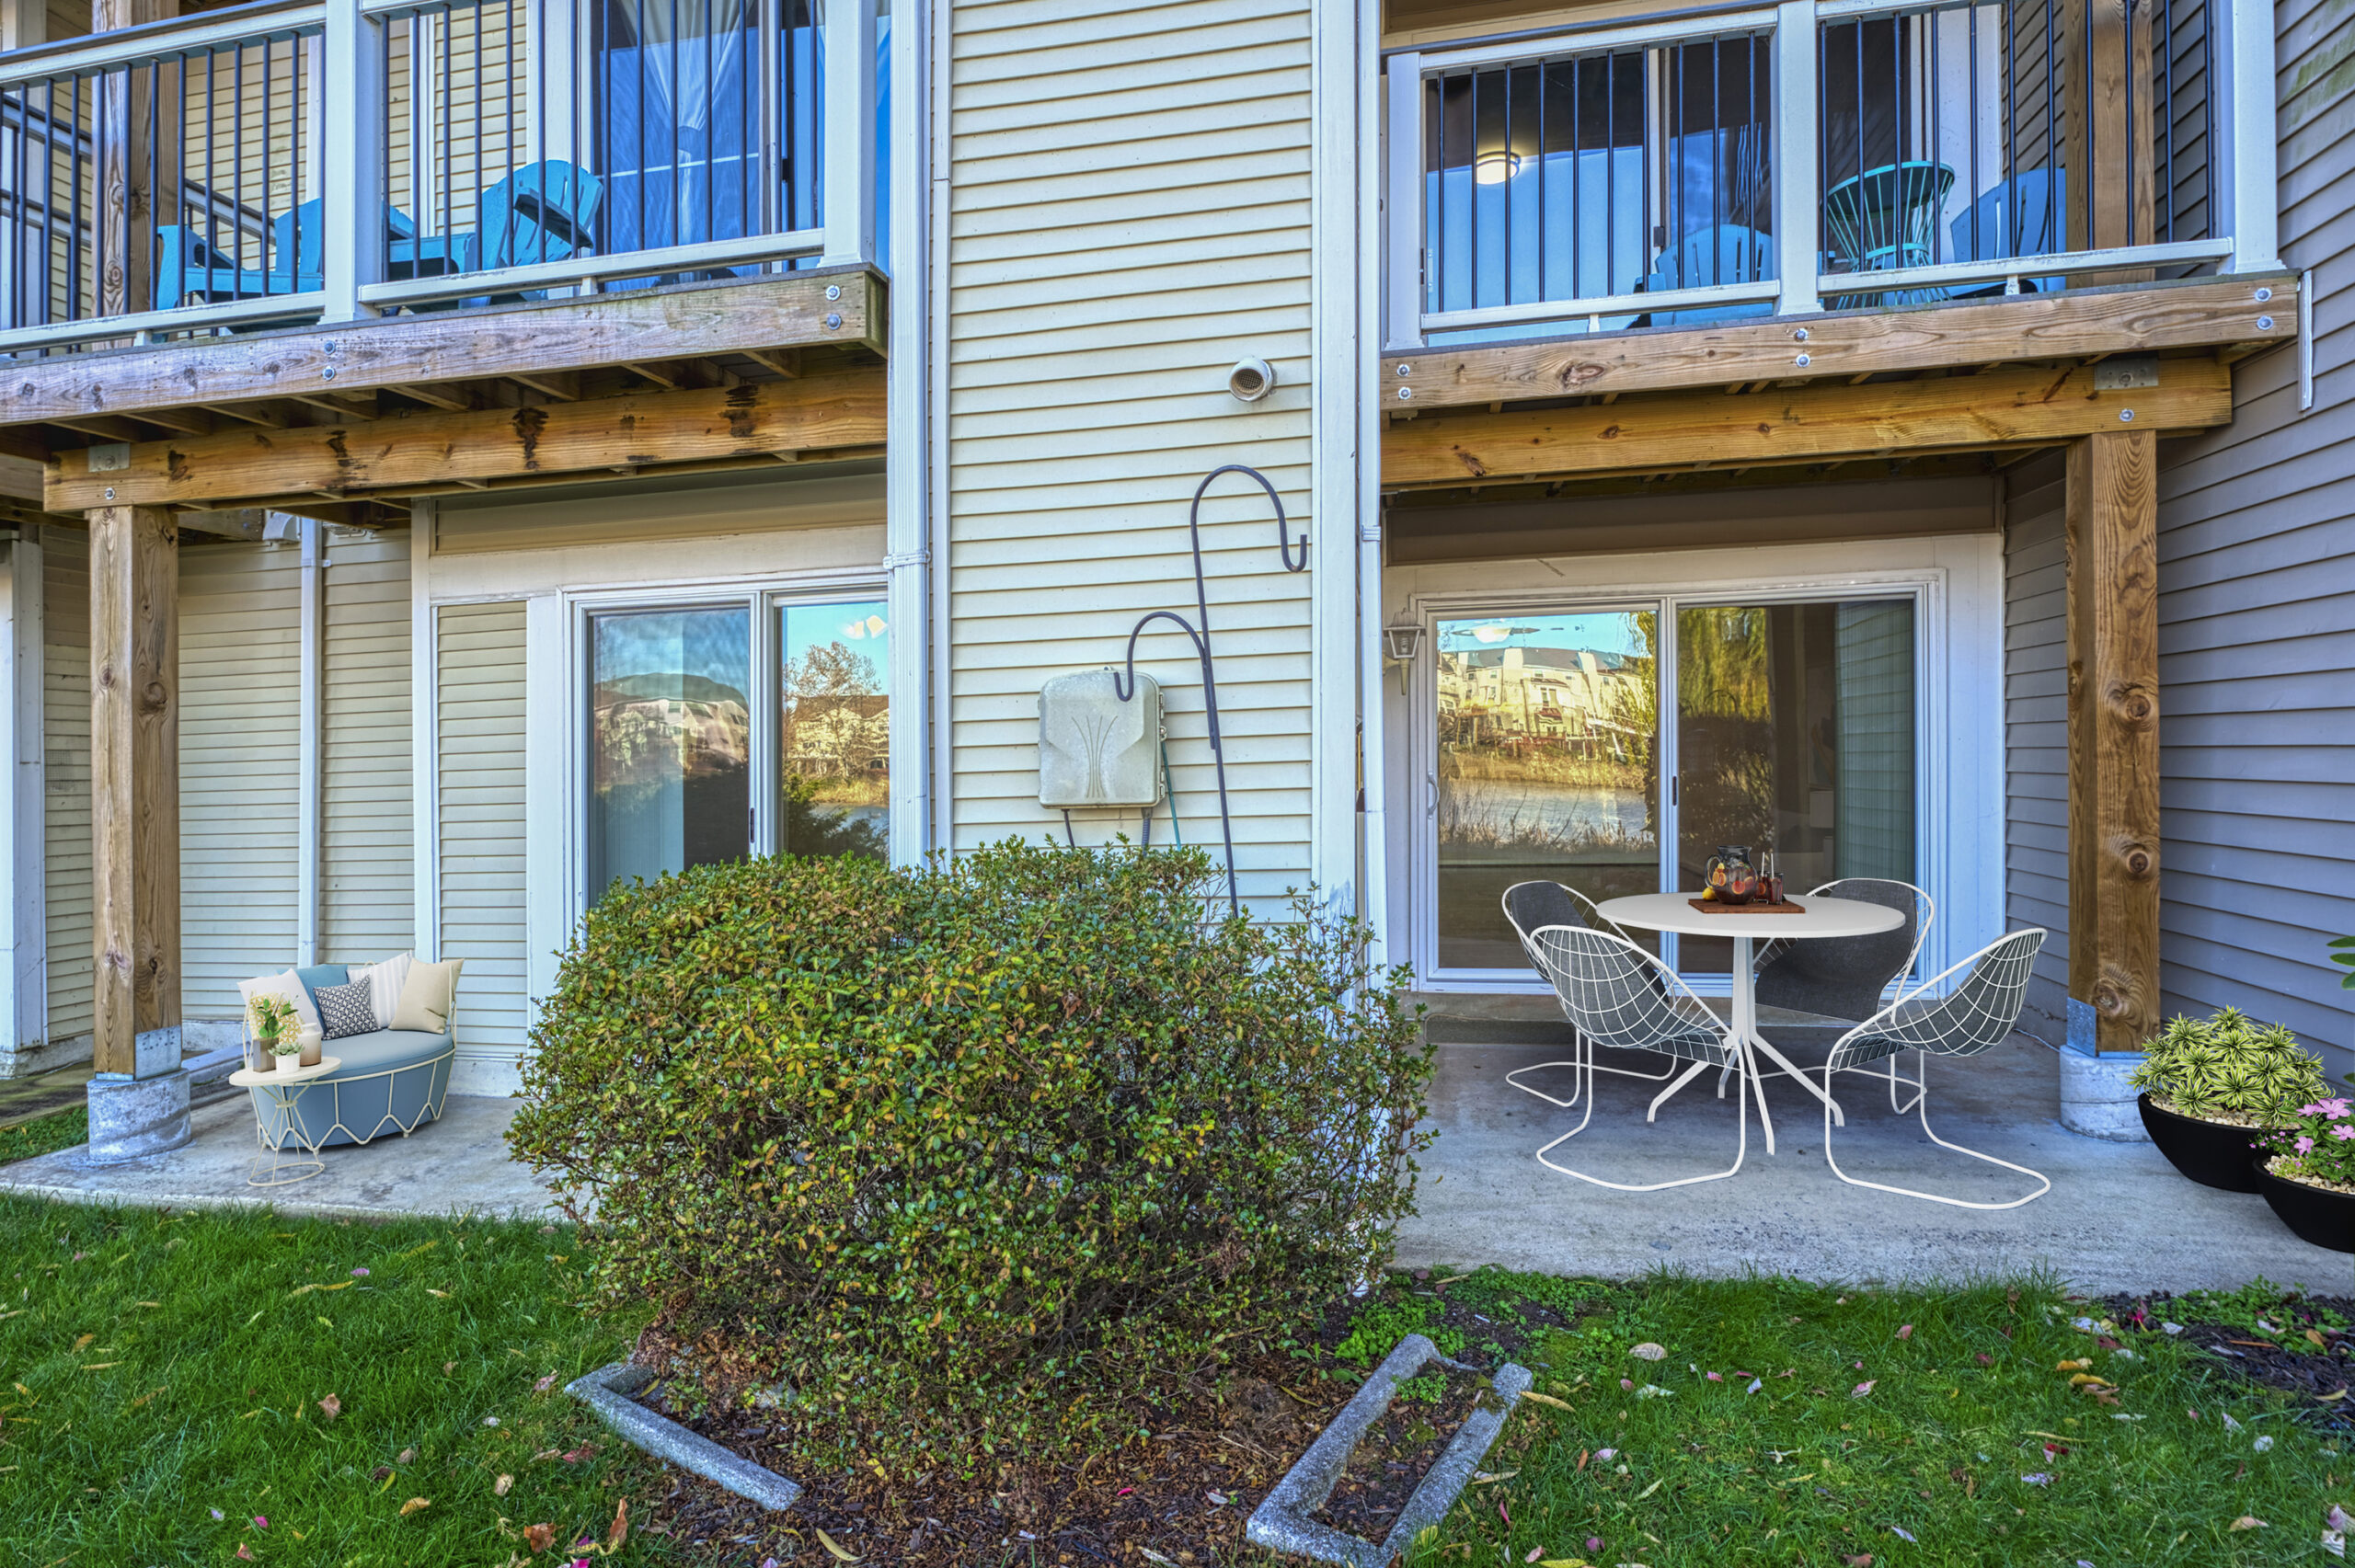 Professional exterior photo of 20588 Cornstalk Ter Unit 101 - Showing the rear patio of the unit on the ground floor which has been virtually staged to show patio furniture